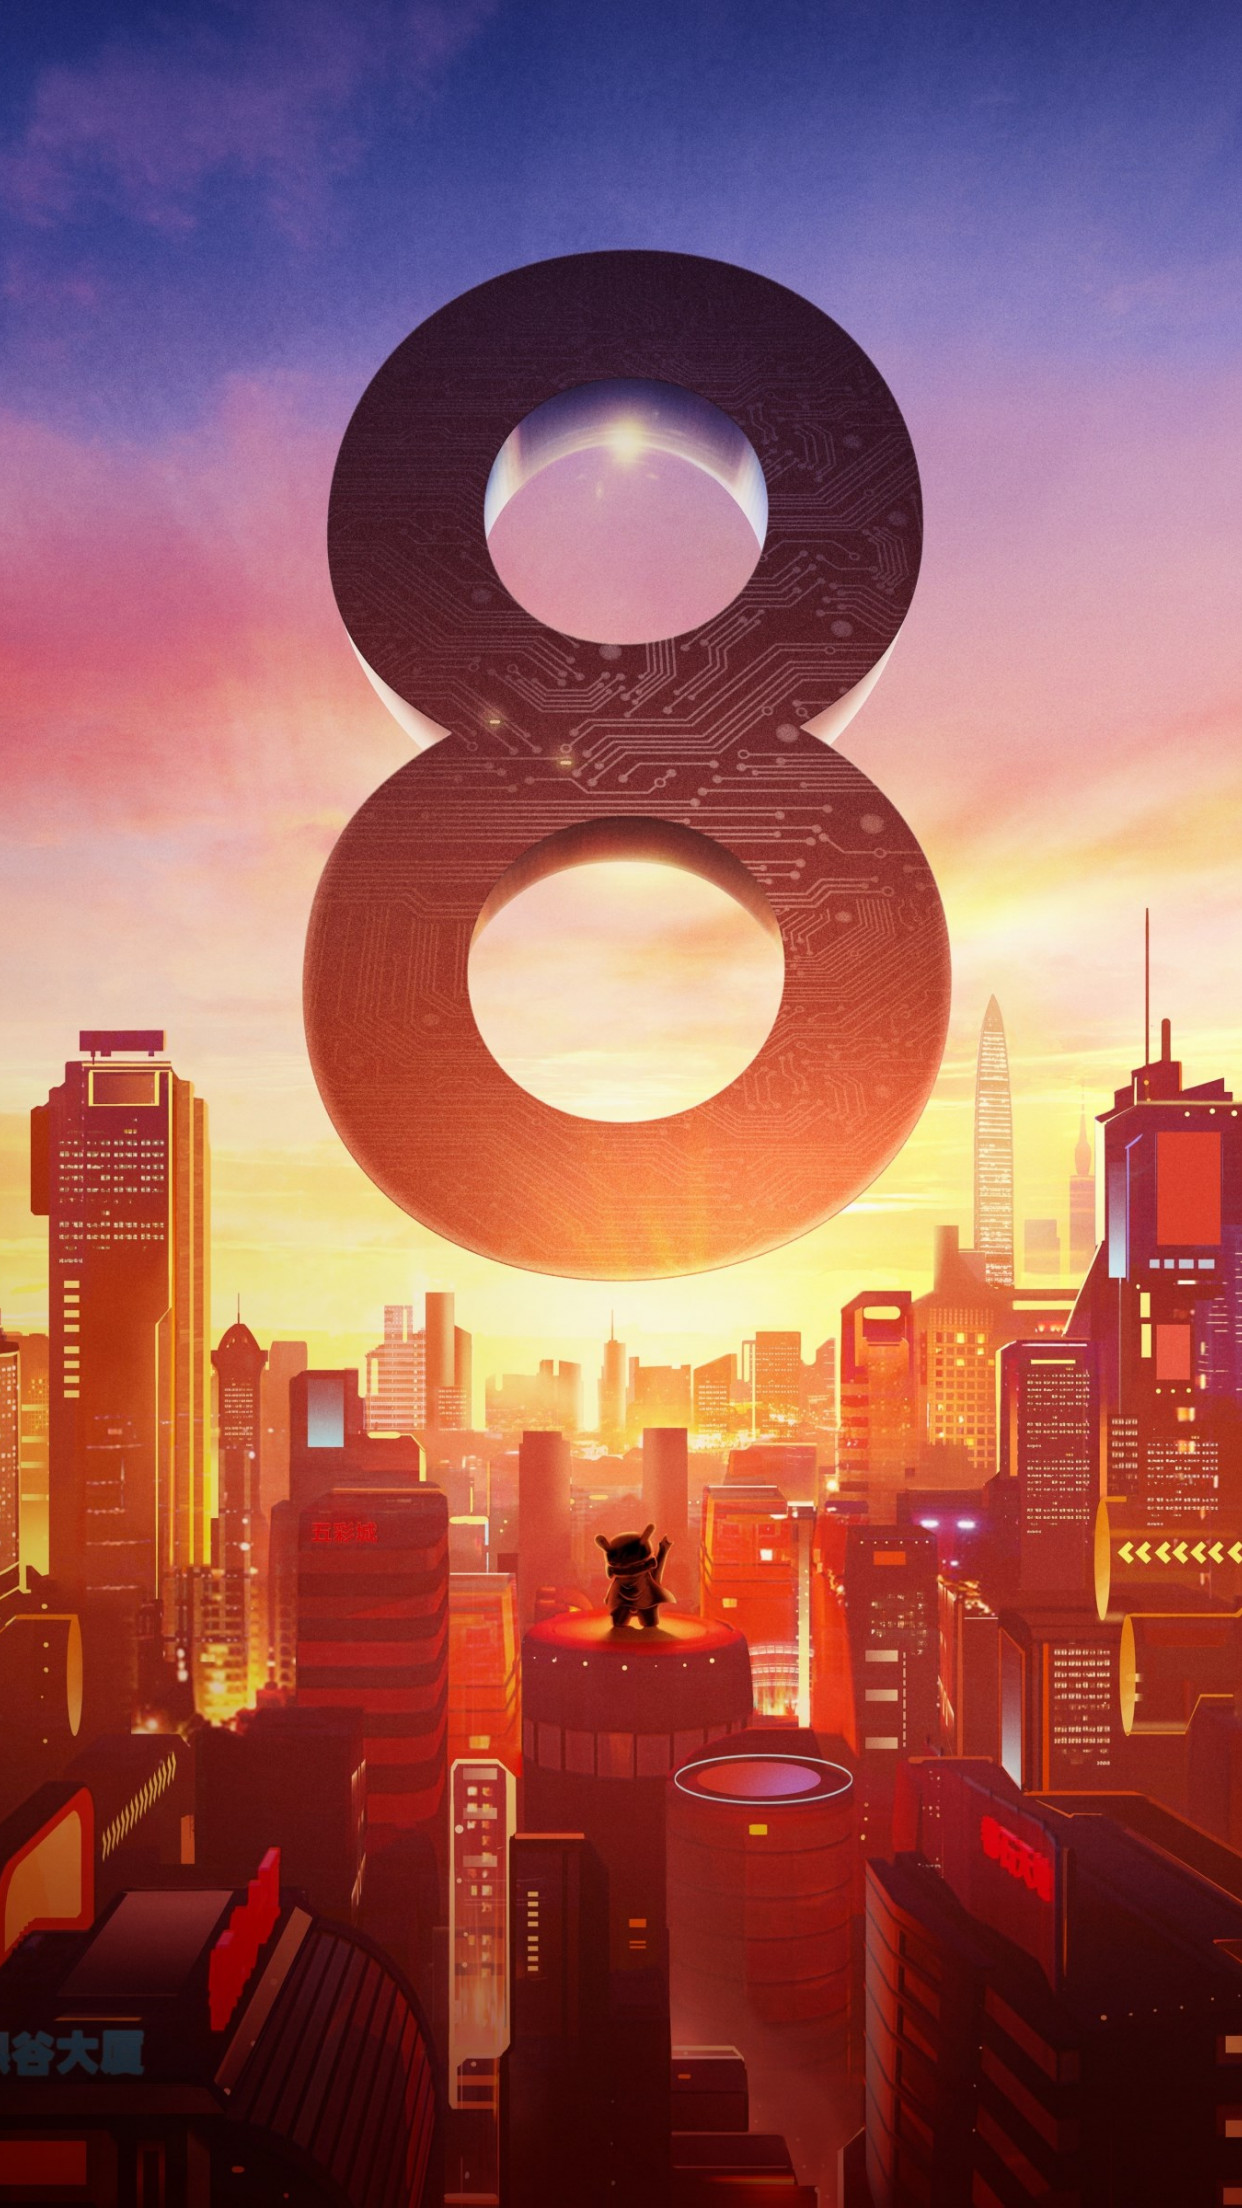 Xiaomi Mi 8. Poster from the launch event wallpaper 1242x2208